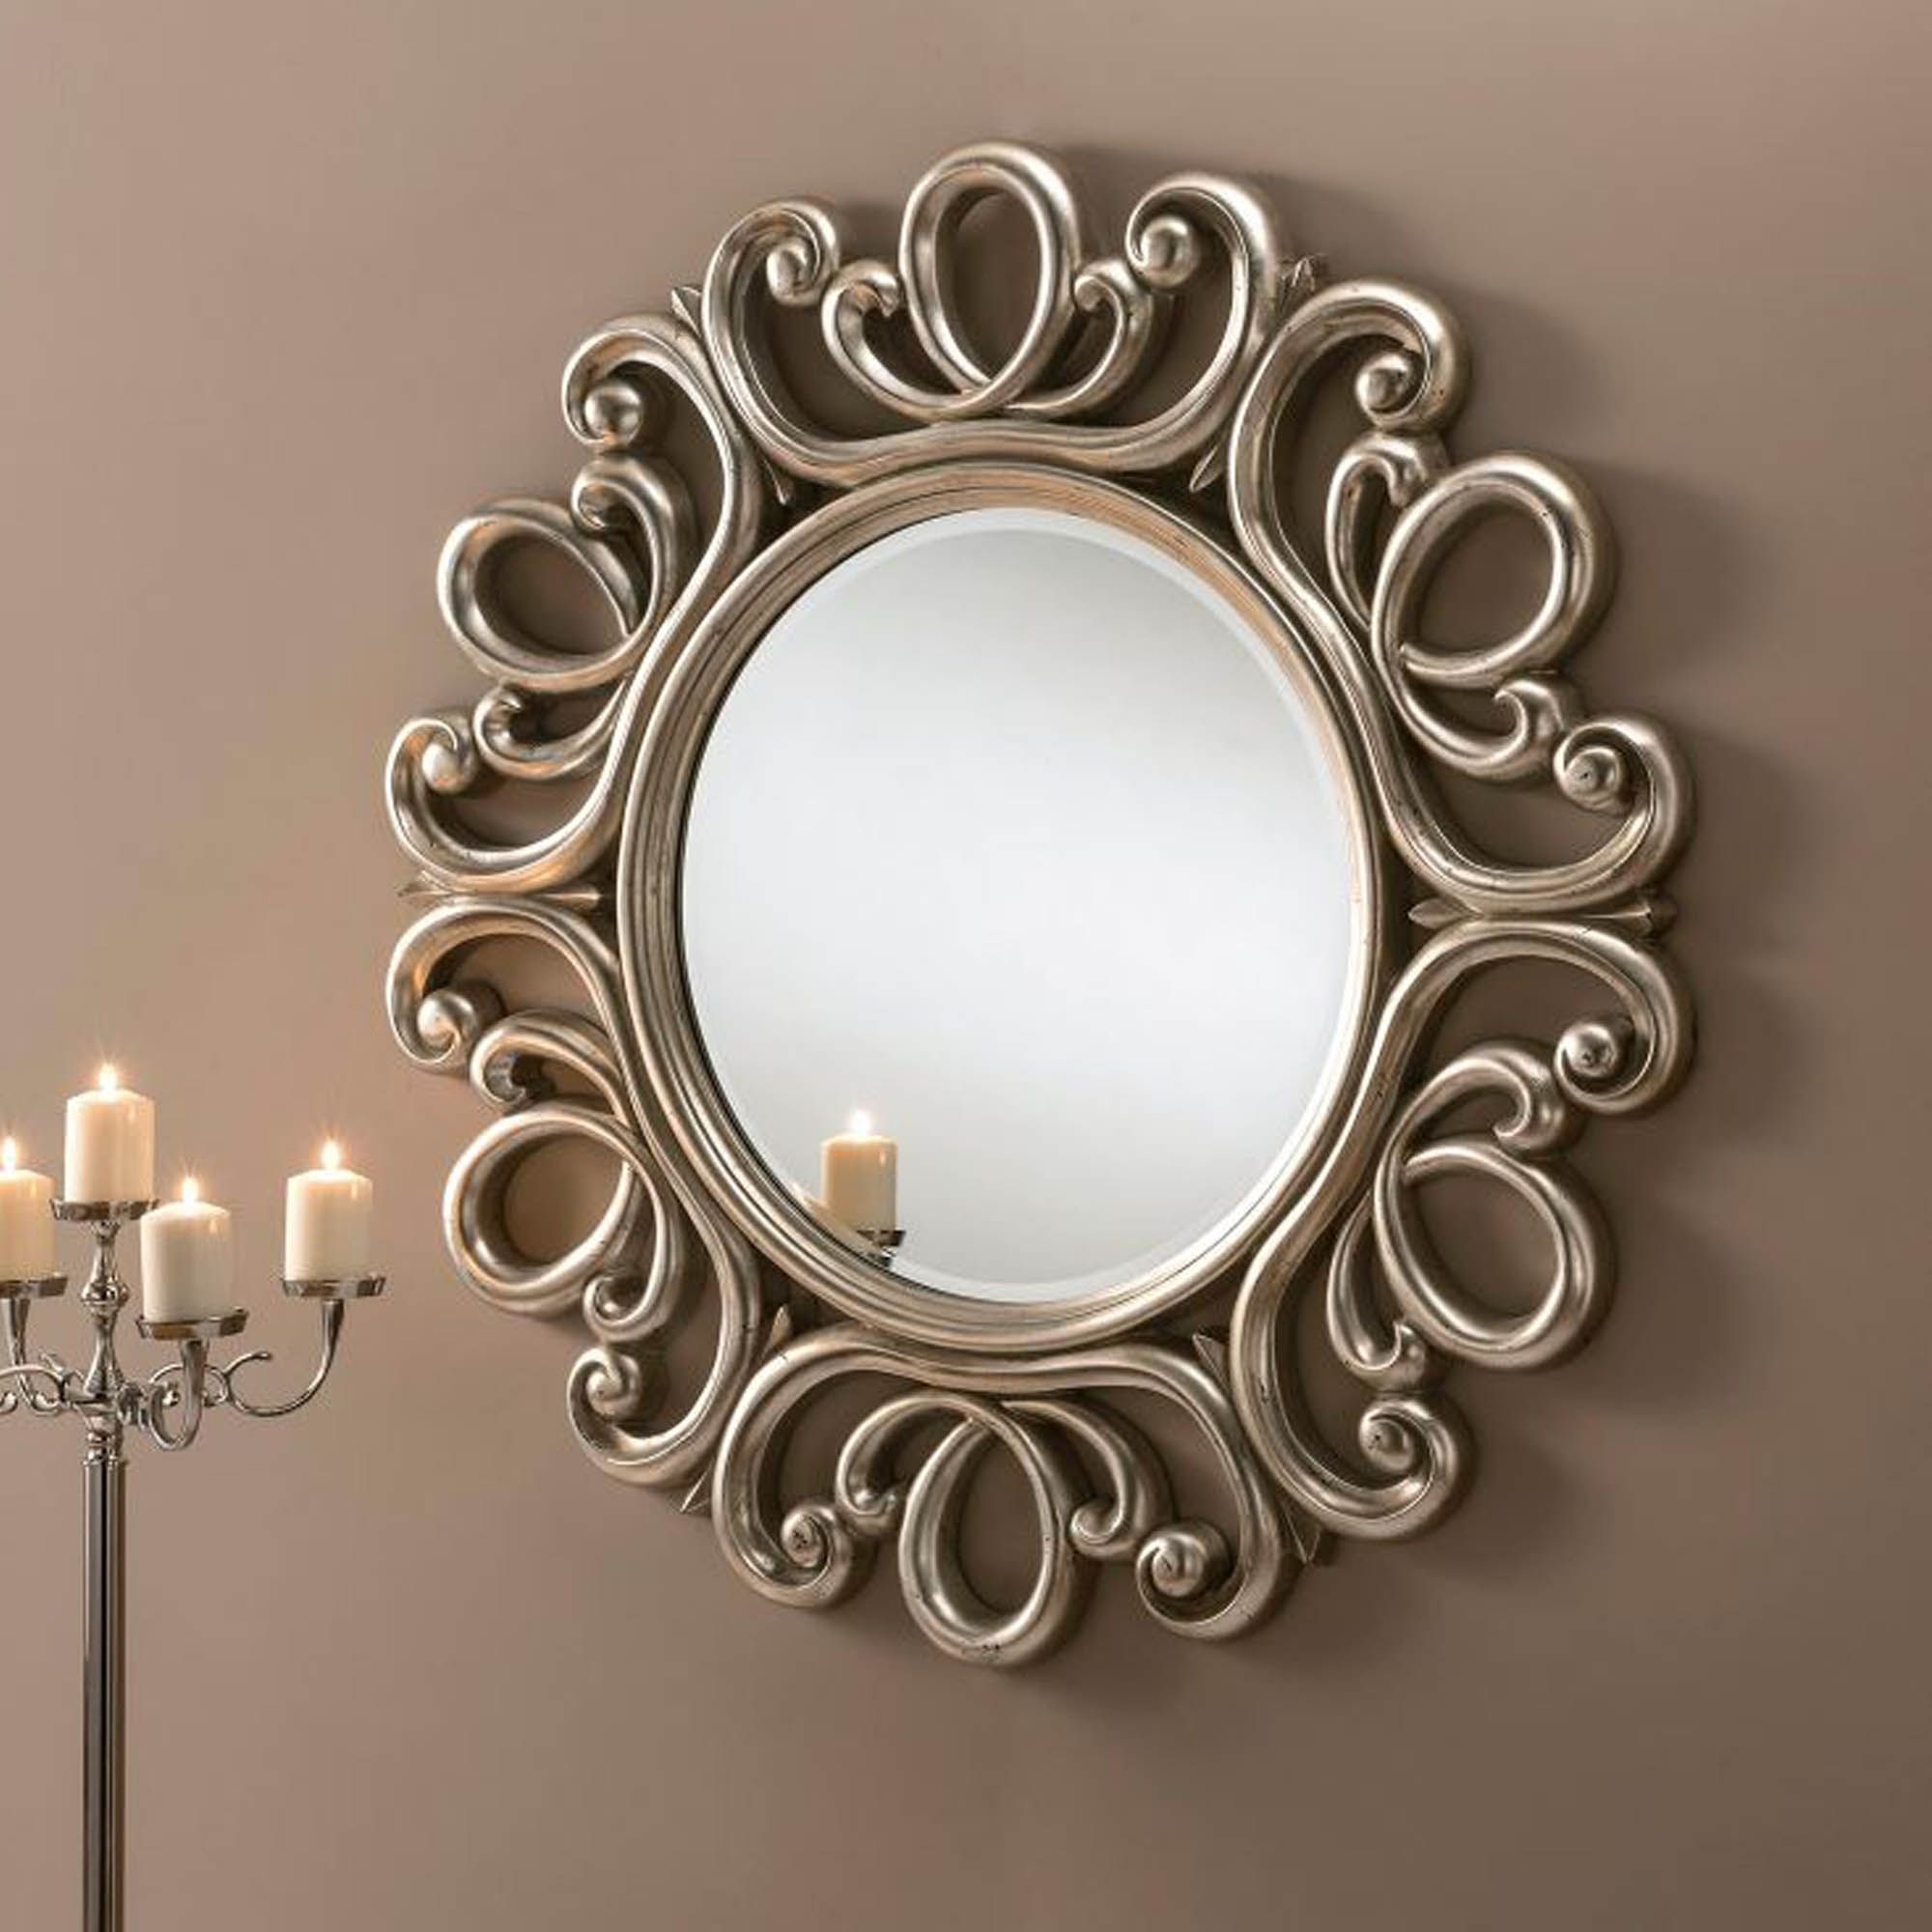 Antique Silver Swirl Ornate Wall Mirror | Wall Mirror | Homesdirect365 Within Antiqued Glass Wall Mirrors (View 13 of 15)